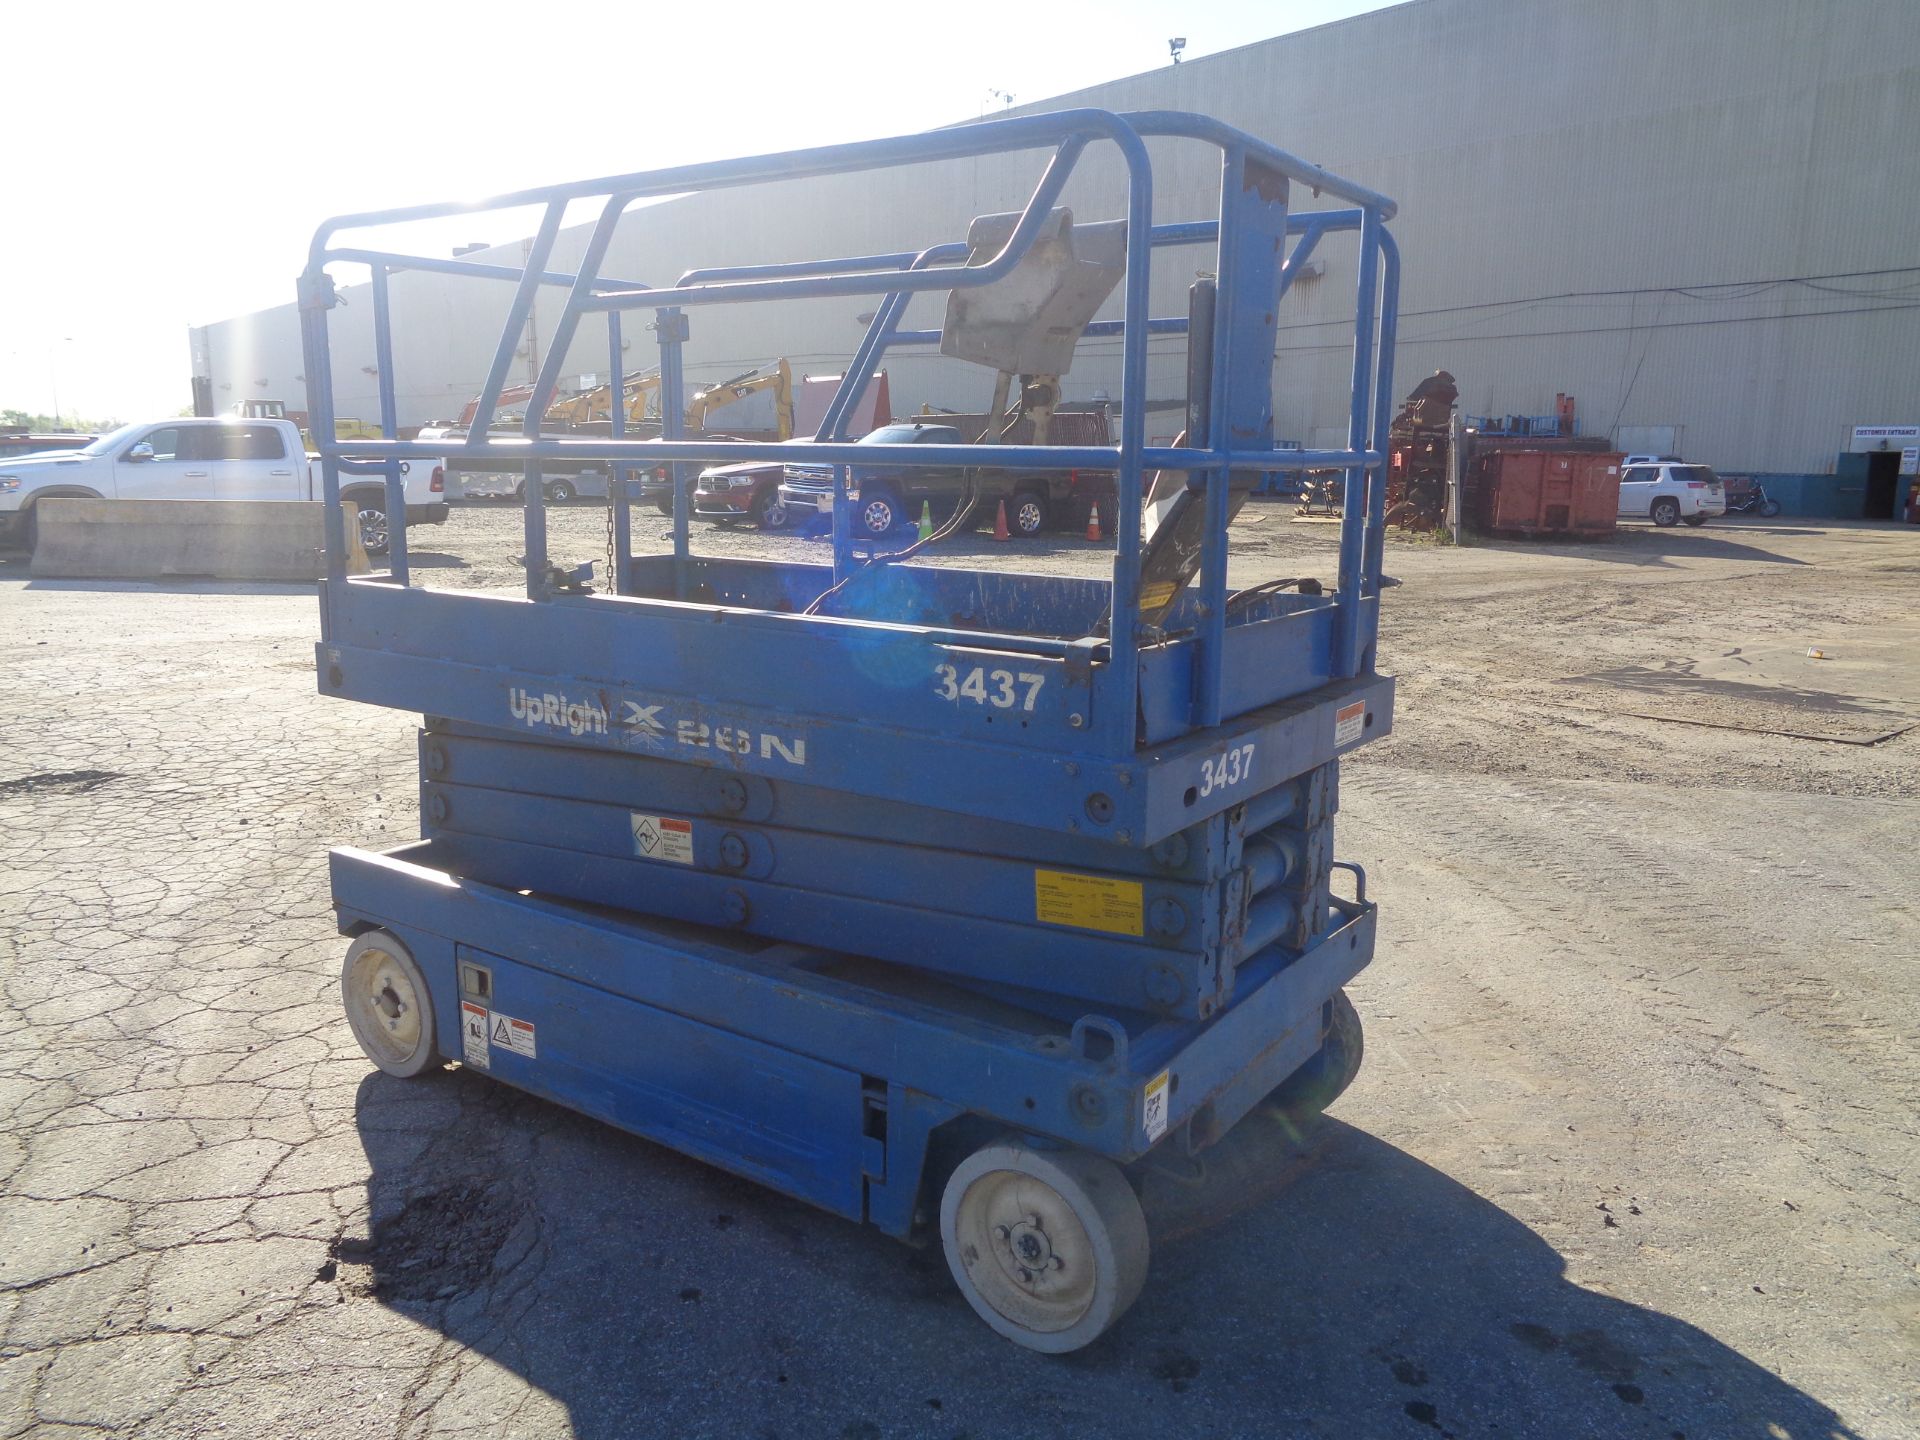 2000 UpRight X26N Scissor Lift - 26Ft Height - Image 19 of 27